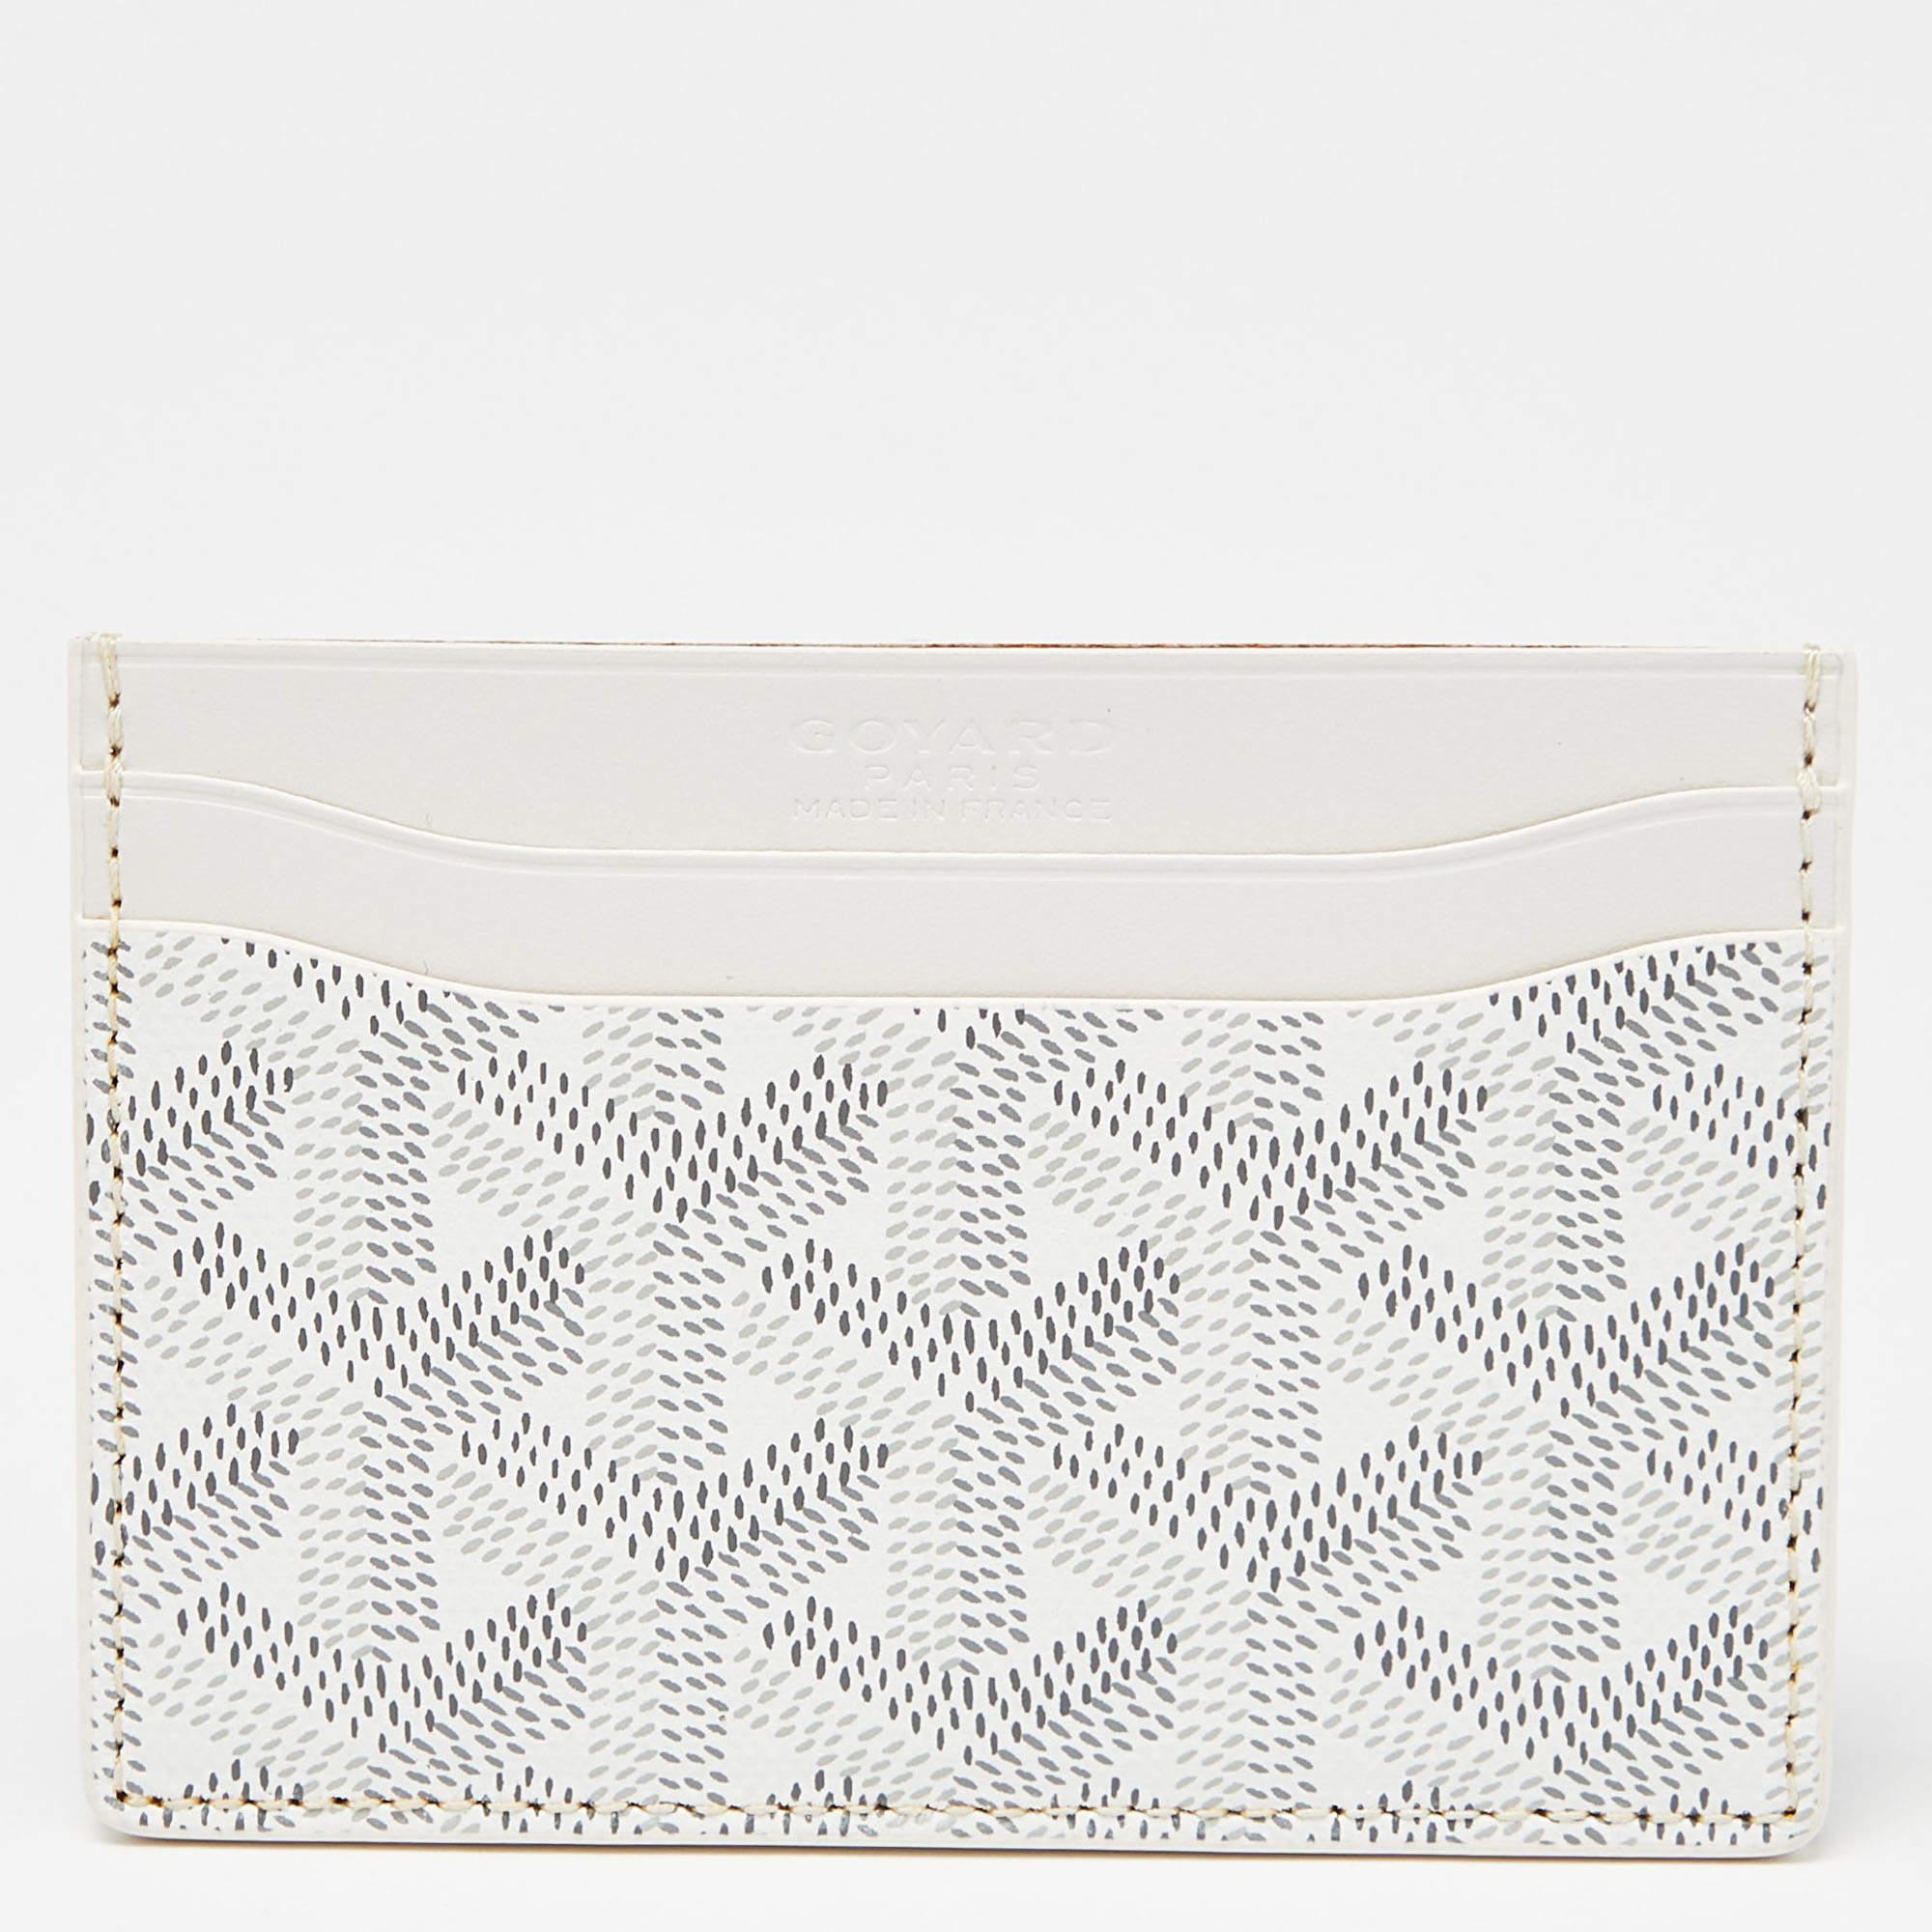 Functional and stylish, this Saint Sulpice cardholder from Goyard is your next best buy. Crafted from the signature Goyardine coated canvas, this card holder features four card slots and leather lining on the insides. It is sleek and can be carried